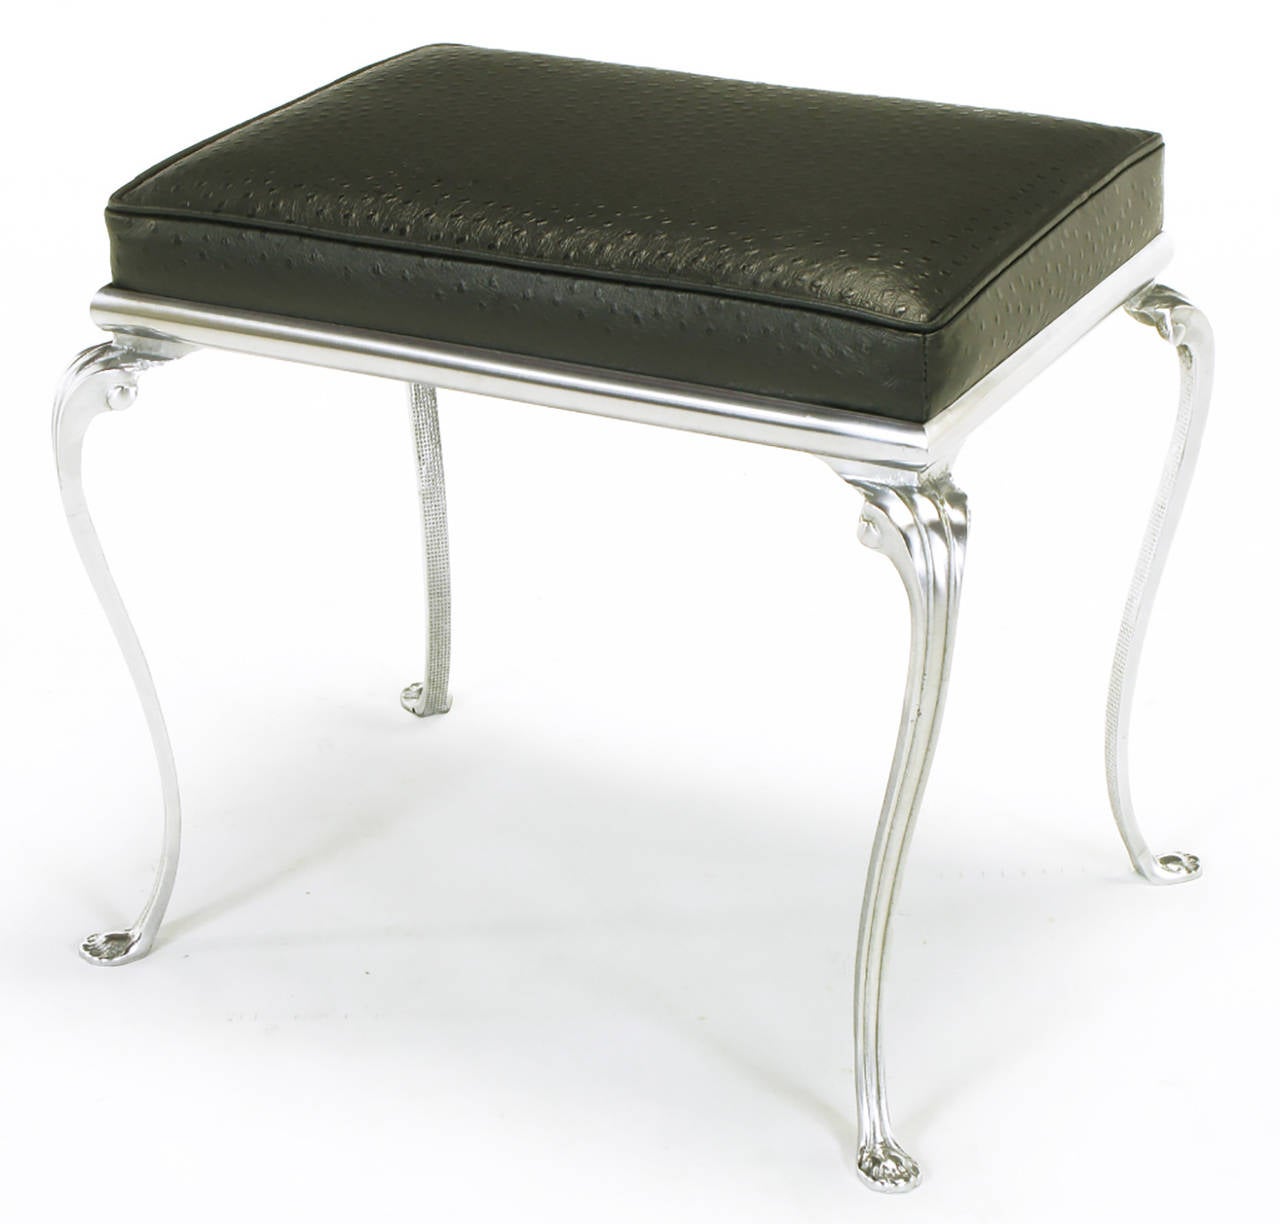 Elegant polished aluminum bench with cabriole legs and stylized paw feet in the manner of Arthur Court. New ostrich embossed leather upholstery.